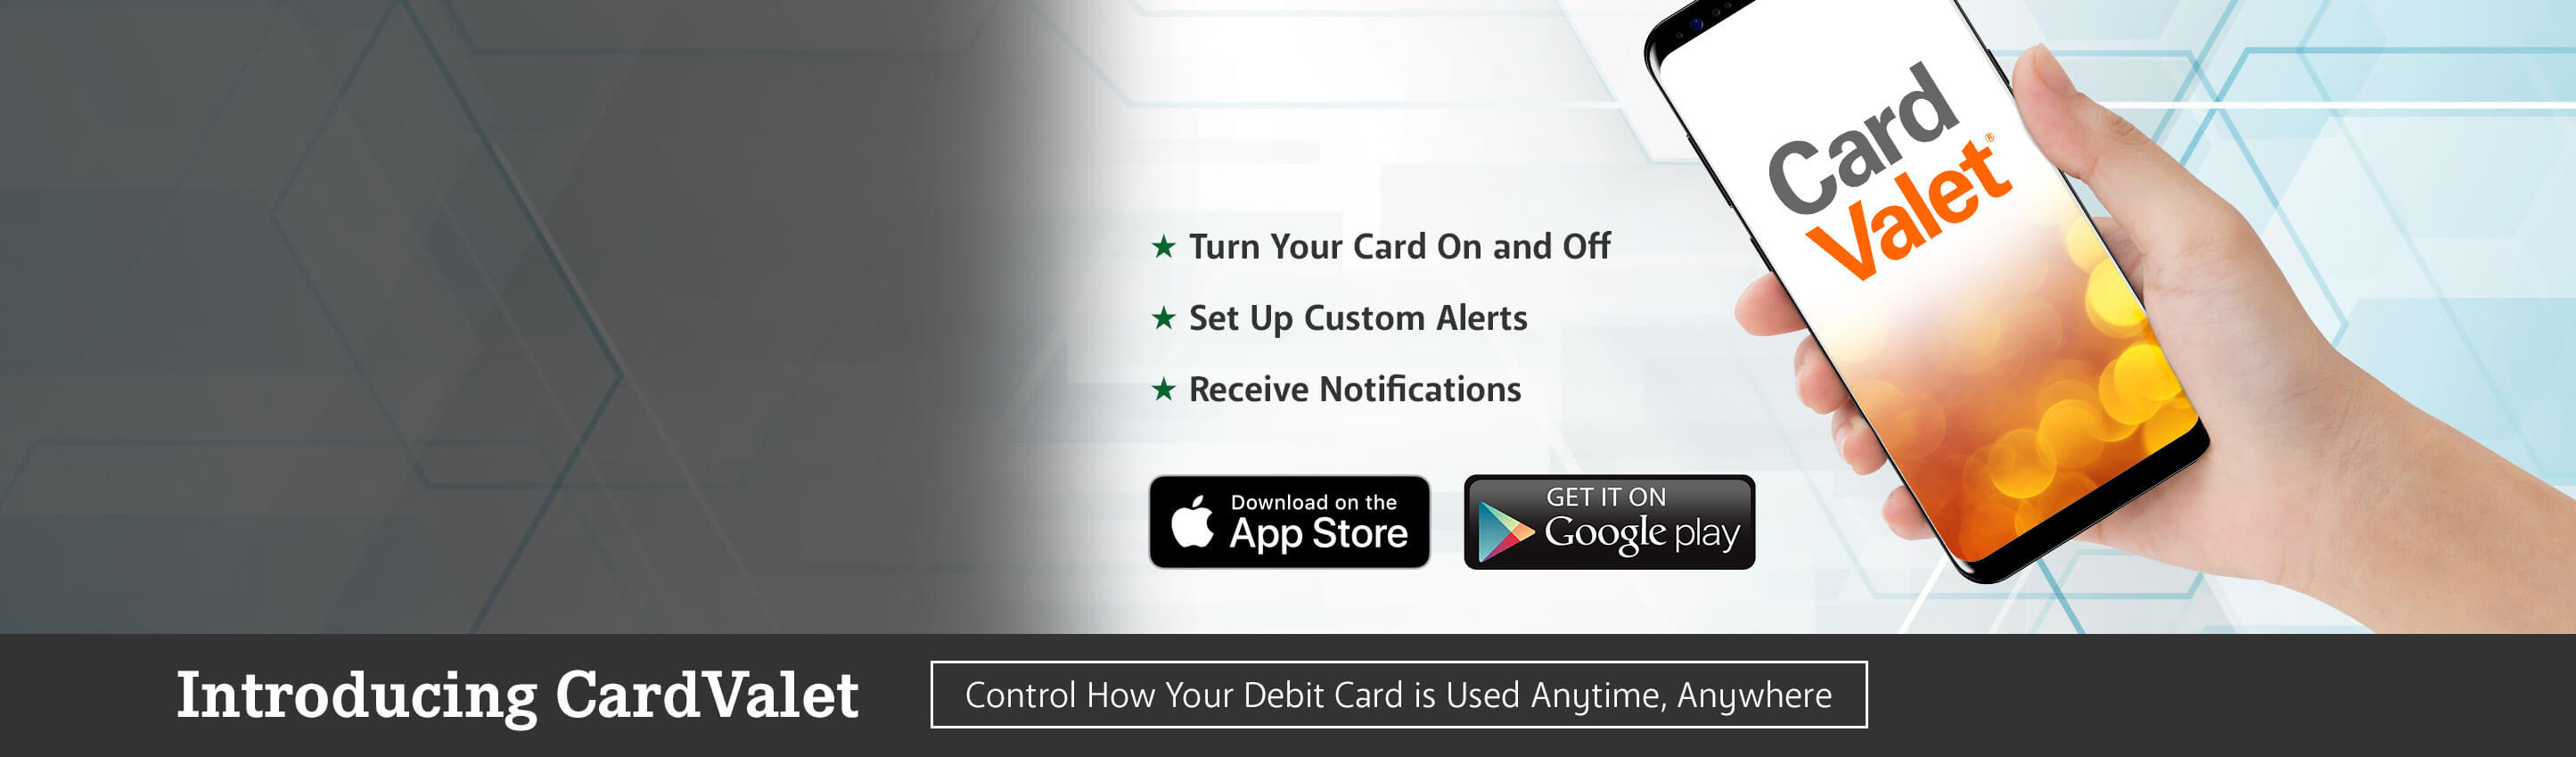 Introducing CardValet. Turn your card on and off. Set up custom alerts. Receive notifications. Control how your debit card is used anytime, anywhere.